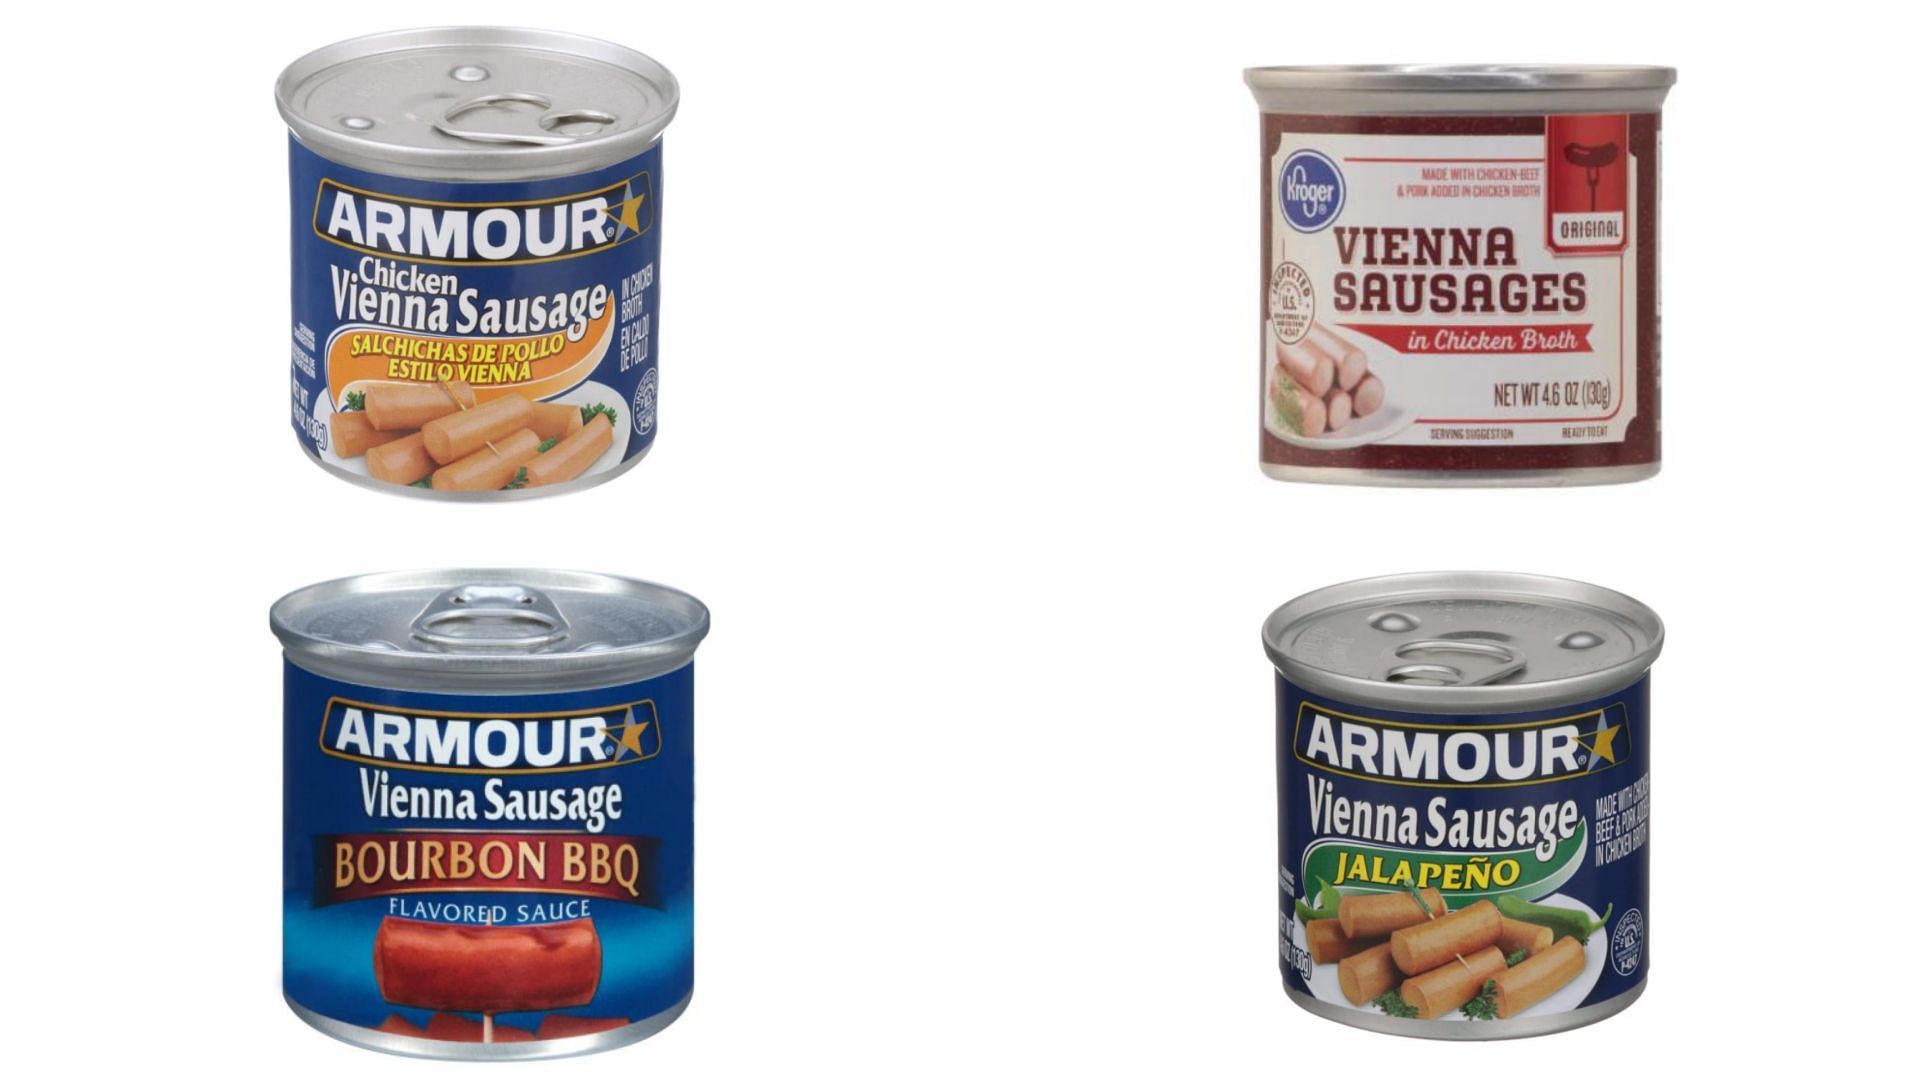 Cans of the recalled Conagra Brands canned meat and poultry products (Image via FSIS)